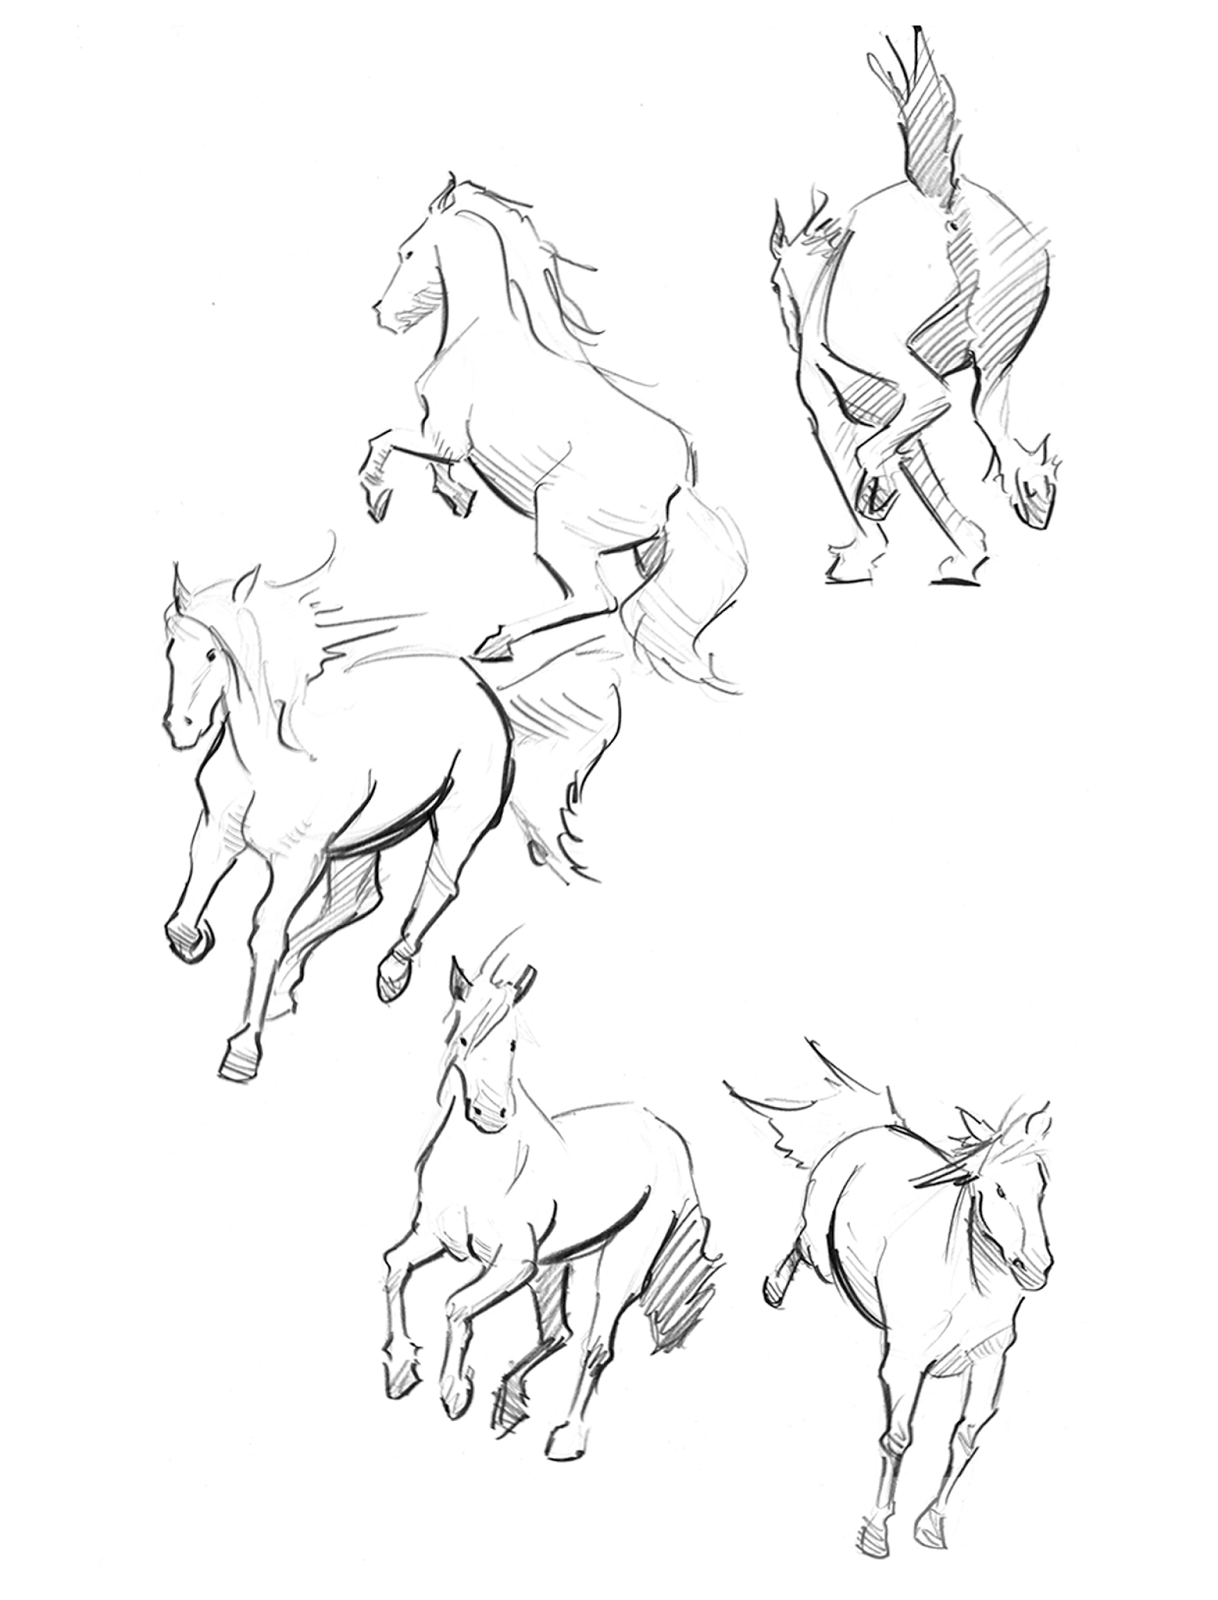 Horse drawing study by fex420 -- Fur Affinity [dot] net